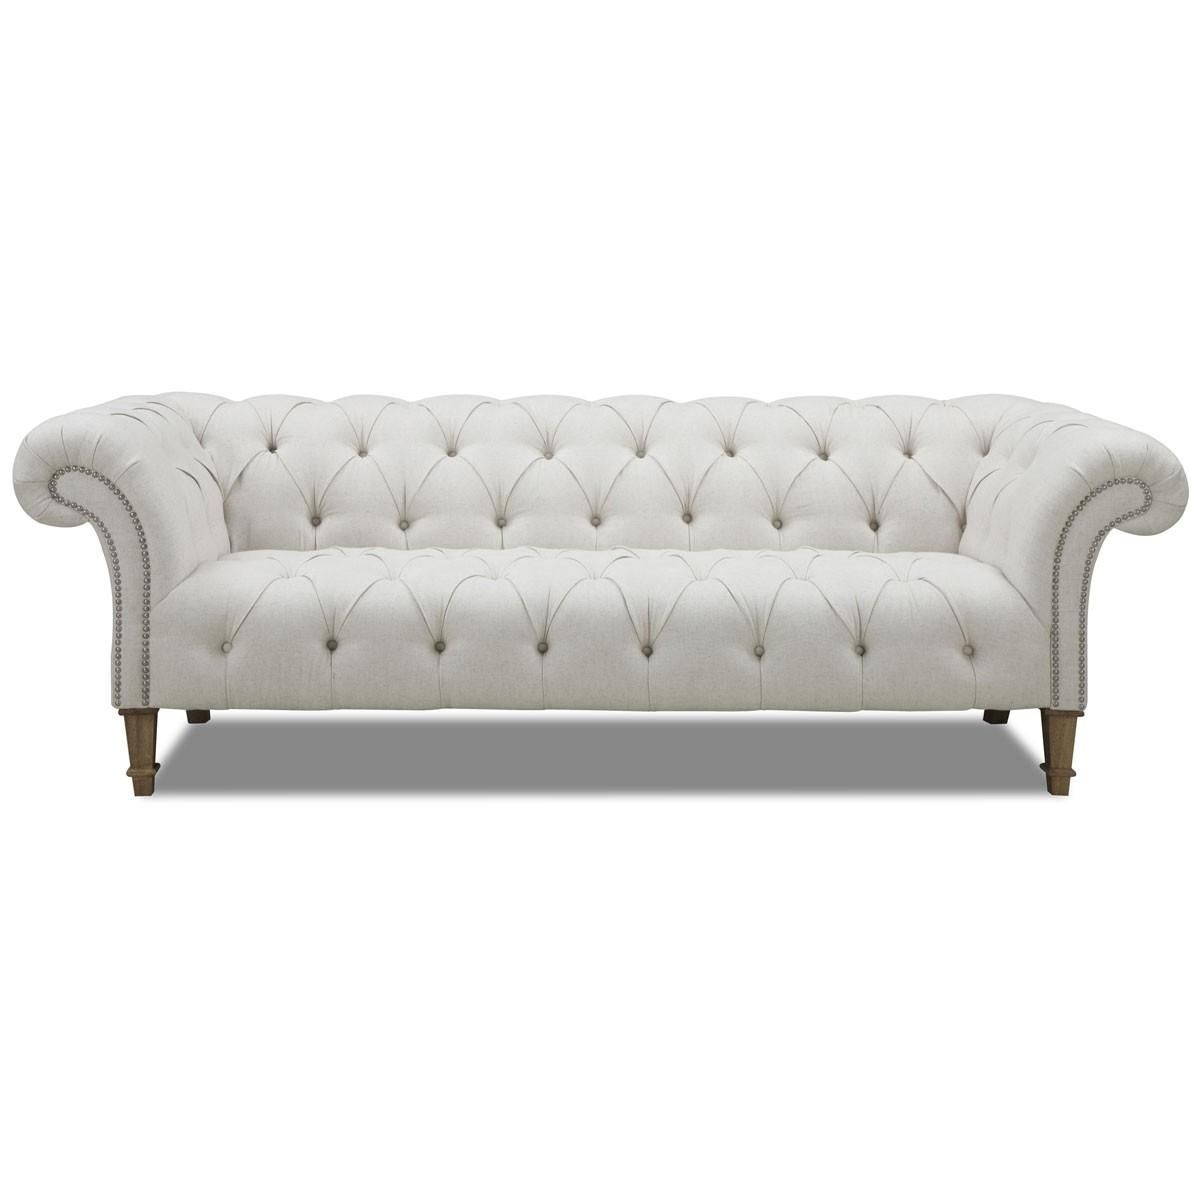 Small Chesterfield Sofa With Concept Image 23818 | Kengire For Small Chesterfield Sofas (View 3 of 20)